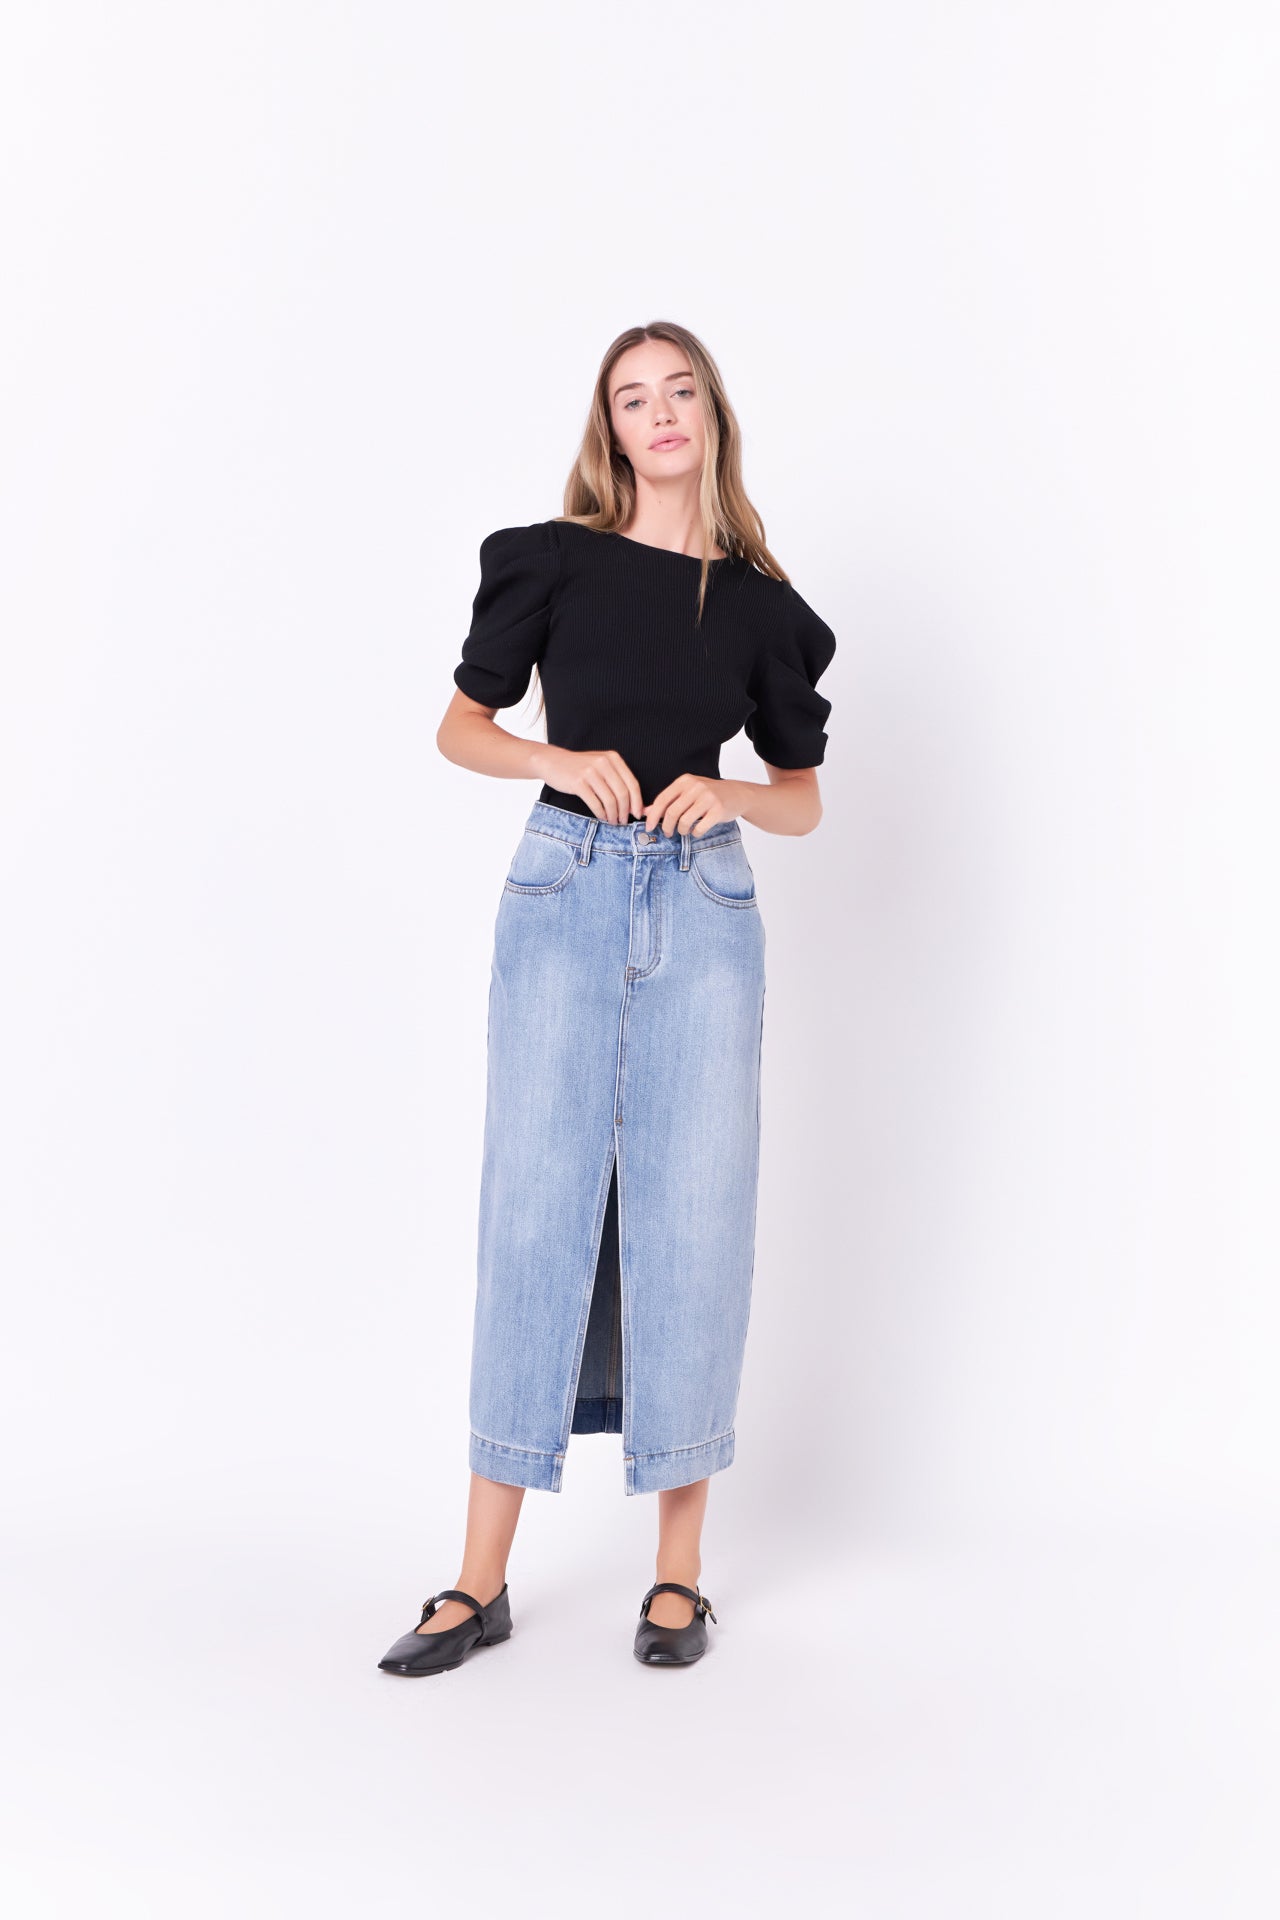 ENGLISH FACTORY - High Waist Long Denim Skirt - SKIRTS available at Objectrare